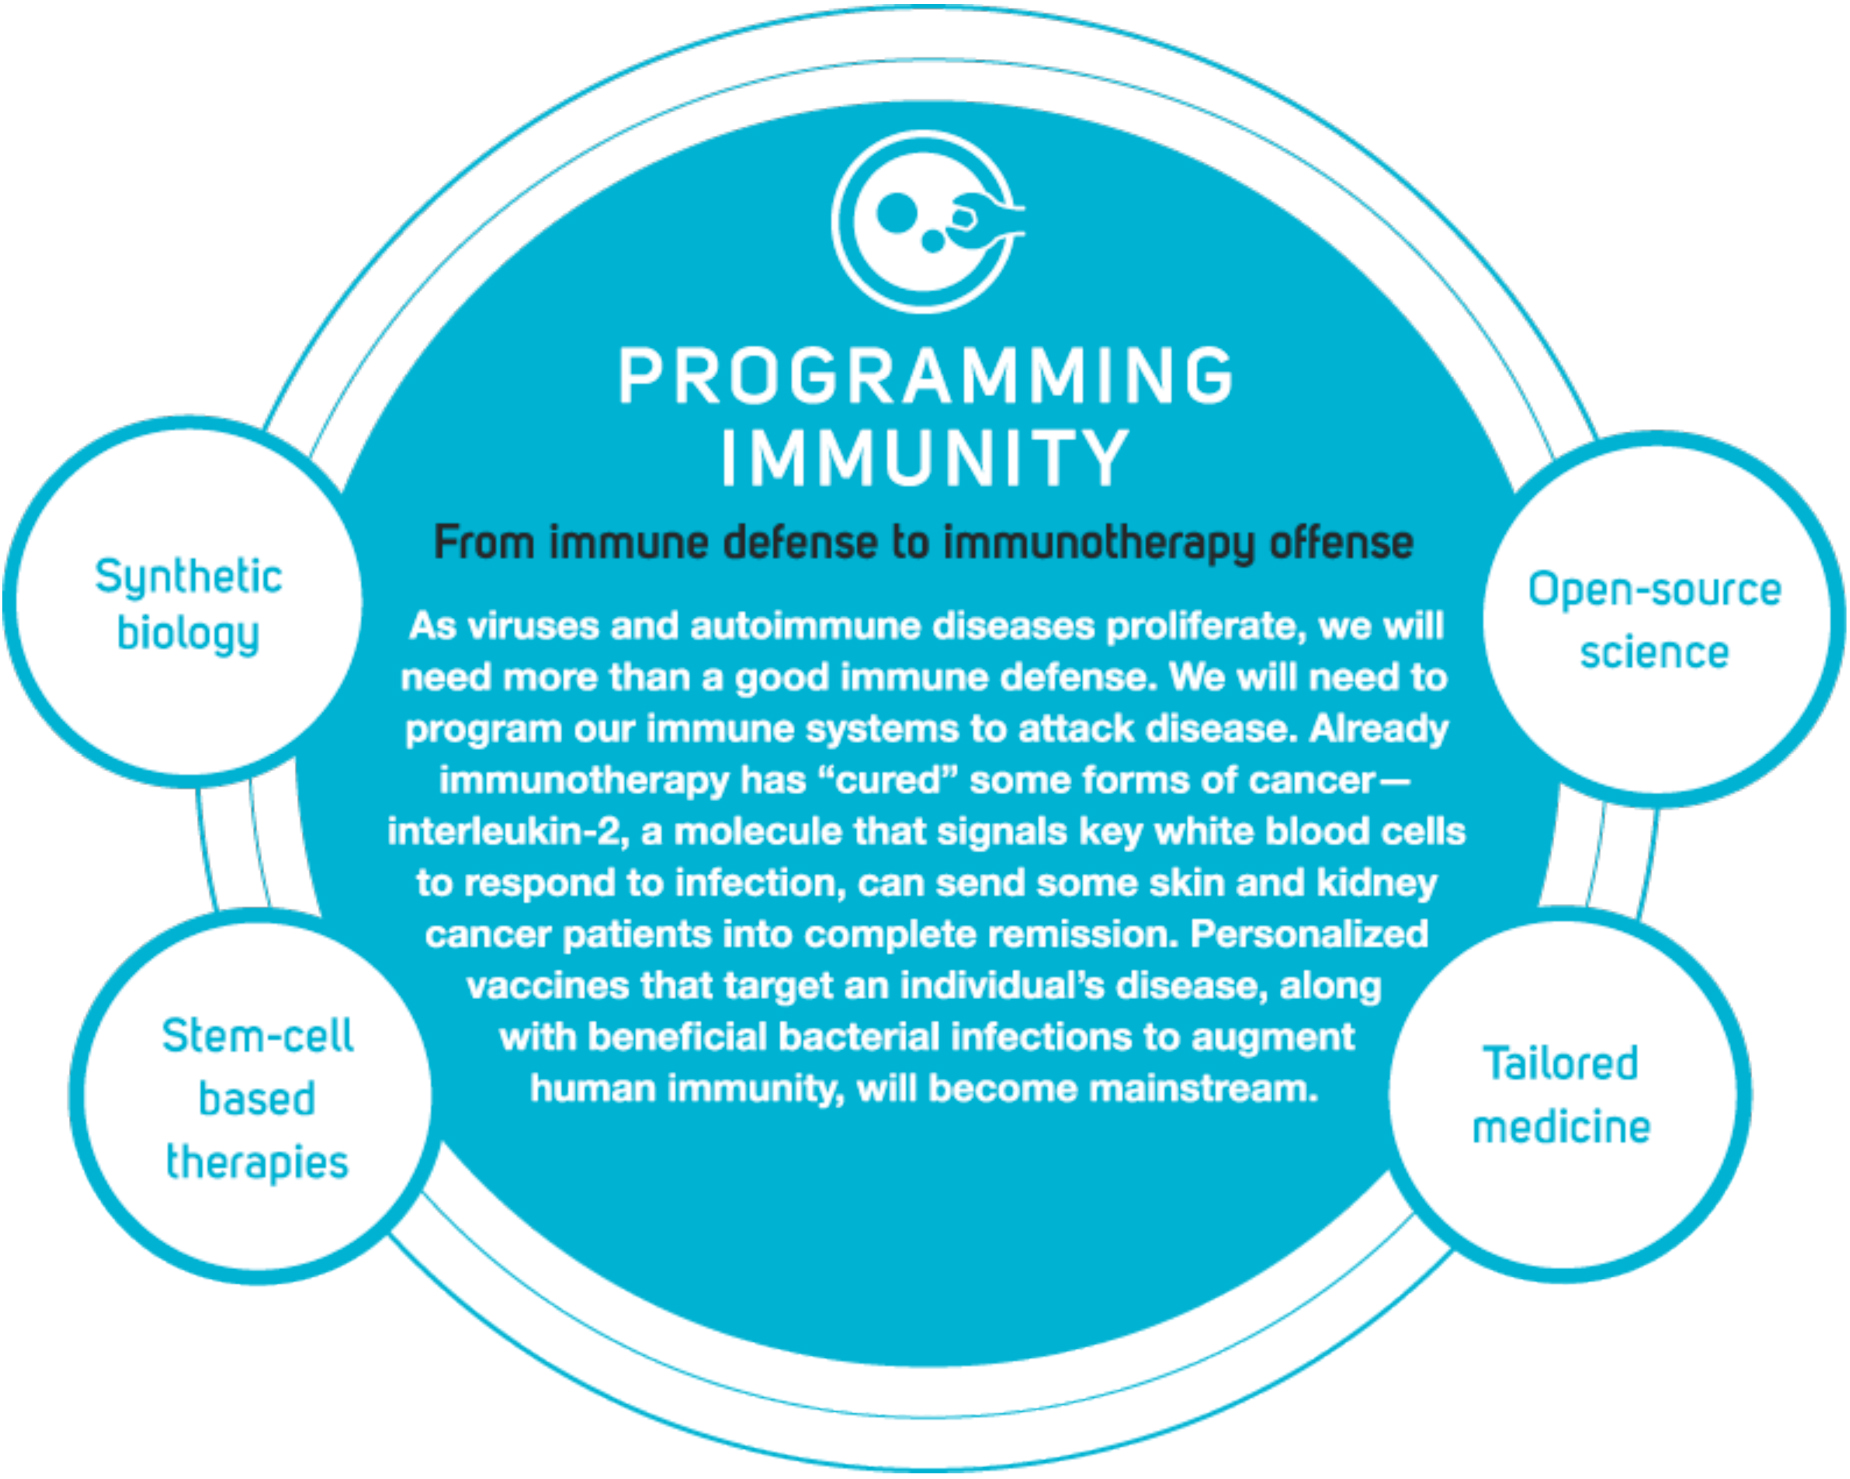 From immune defense to immunotherapy offense